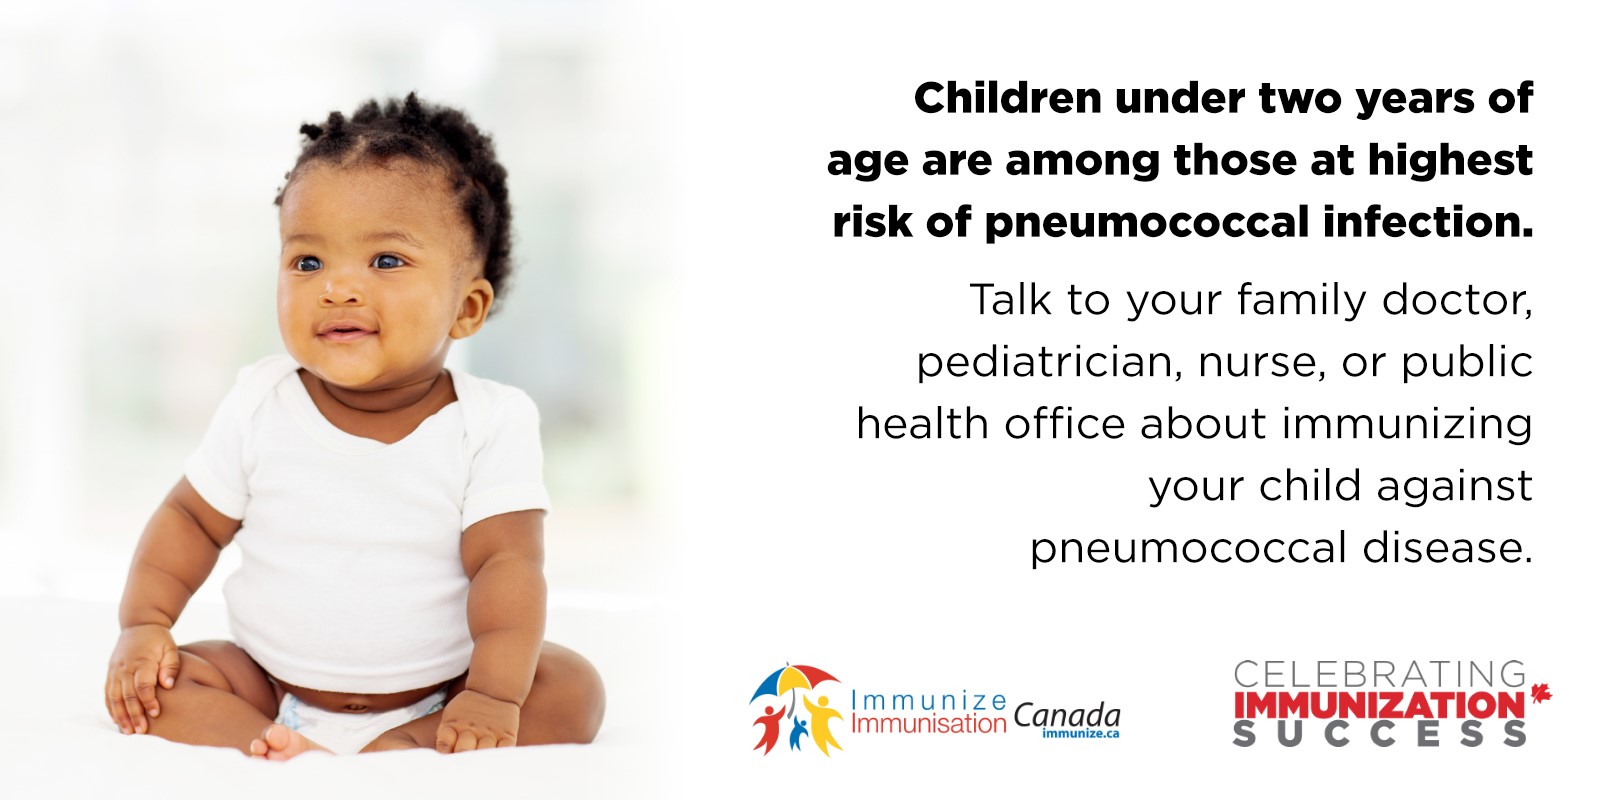 Children under two years of age are among those at highest risk of pneumococcal infection.